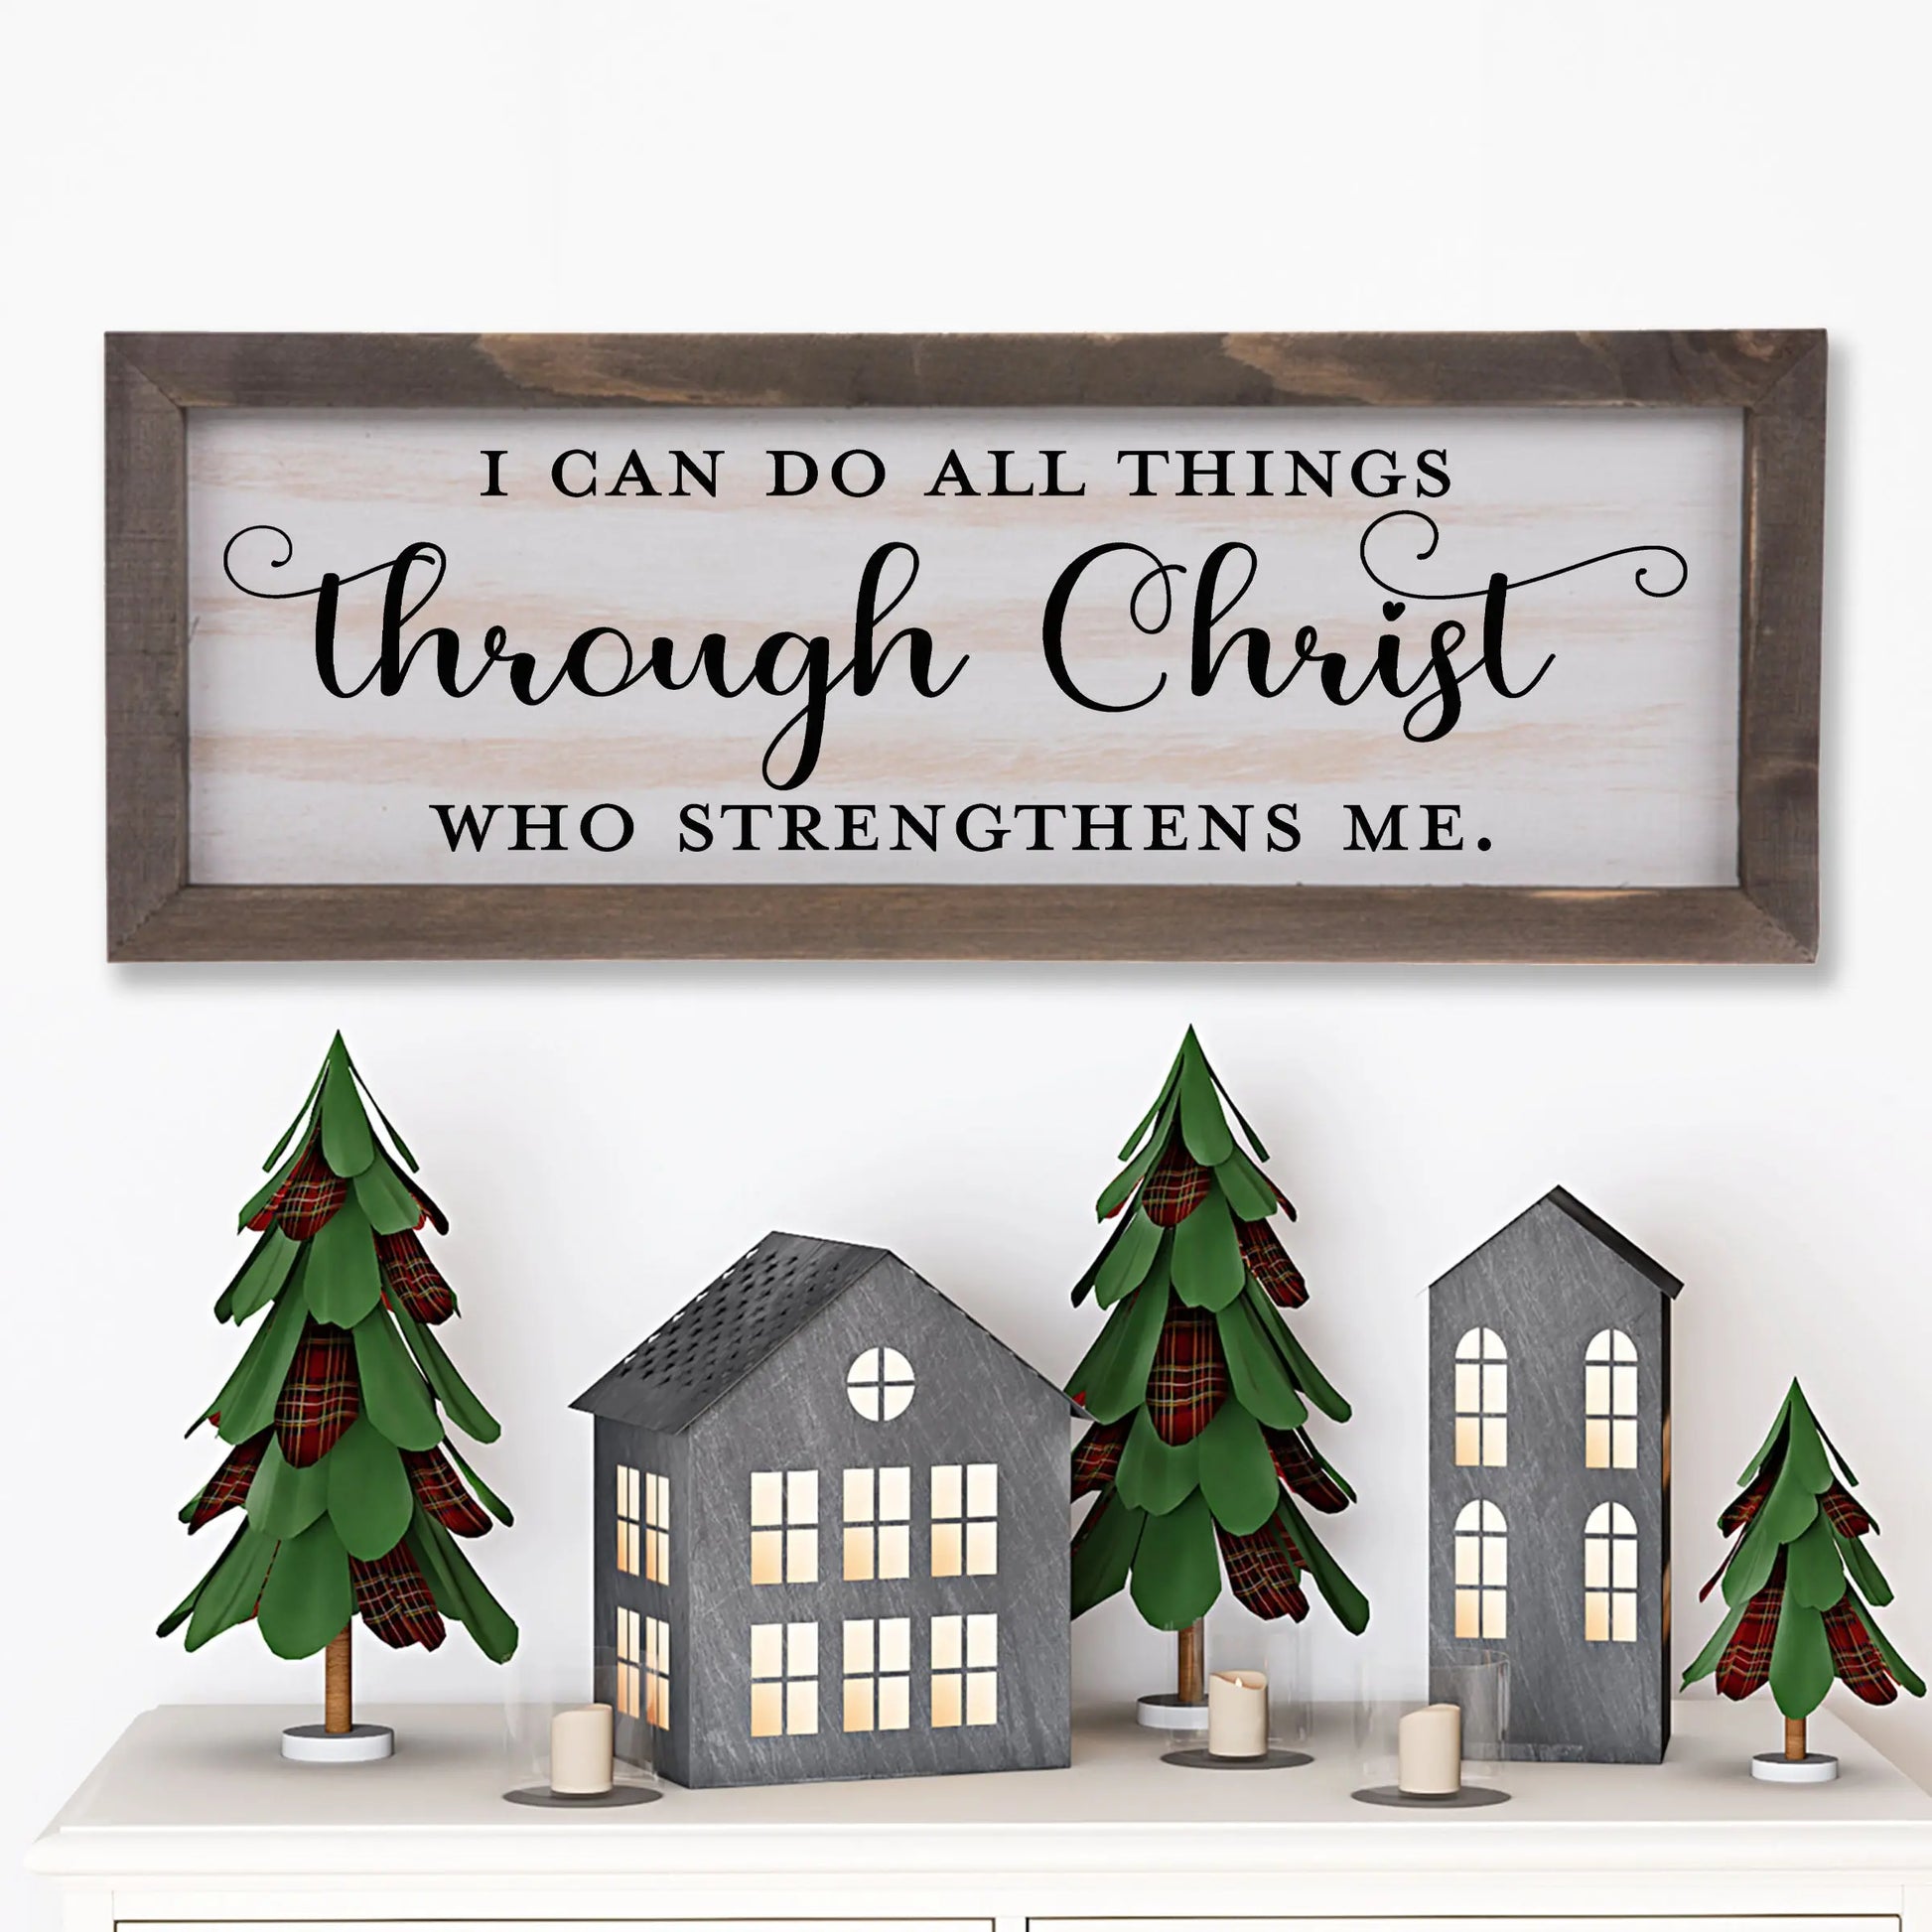 I Can Do All Things Through Christ Who Gives Me Strength Rustic Whitewash Wood Frame Scripture Sign | 5.5" x 15" Farmhouse Decor amazingfaithdesigns